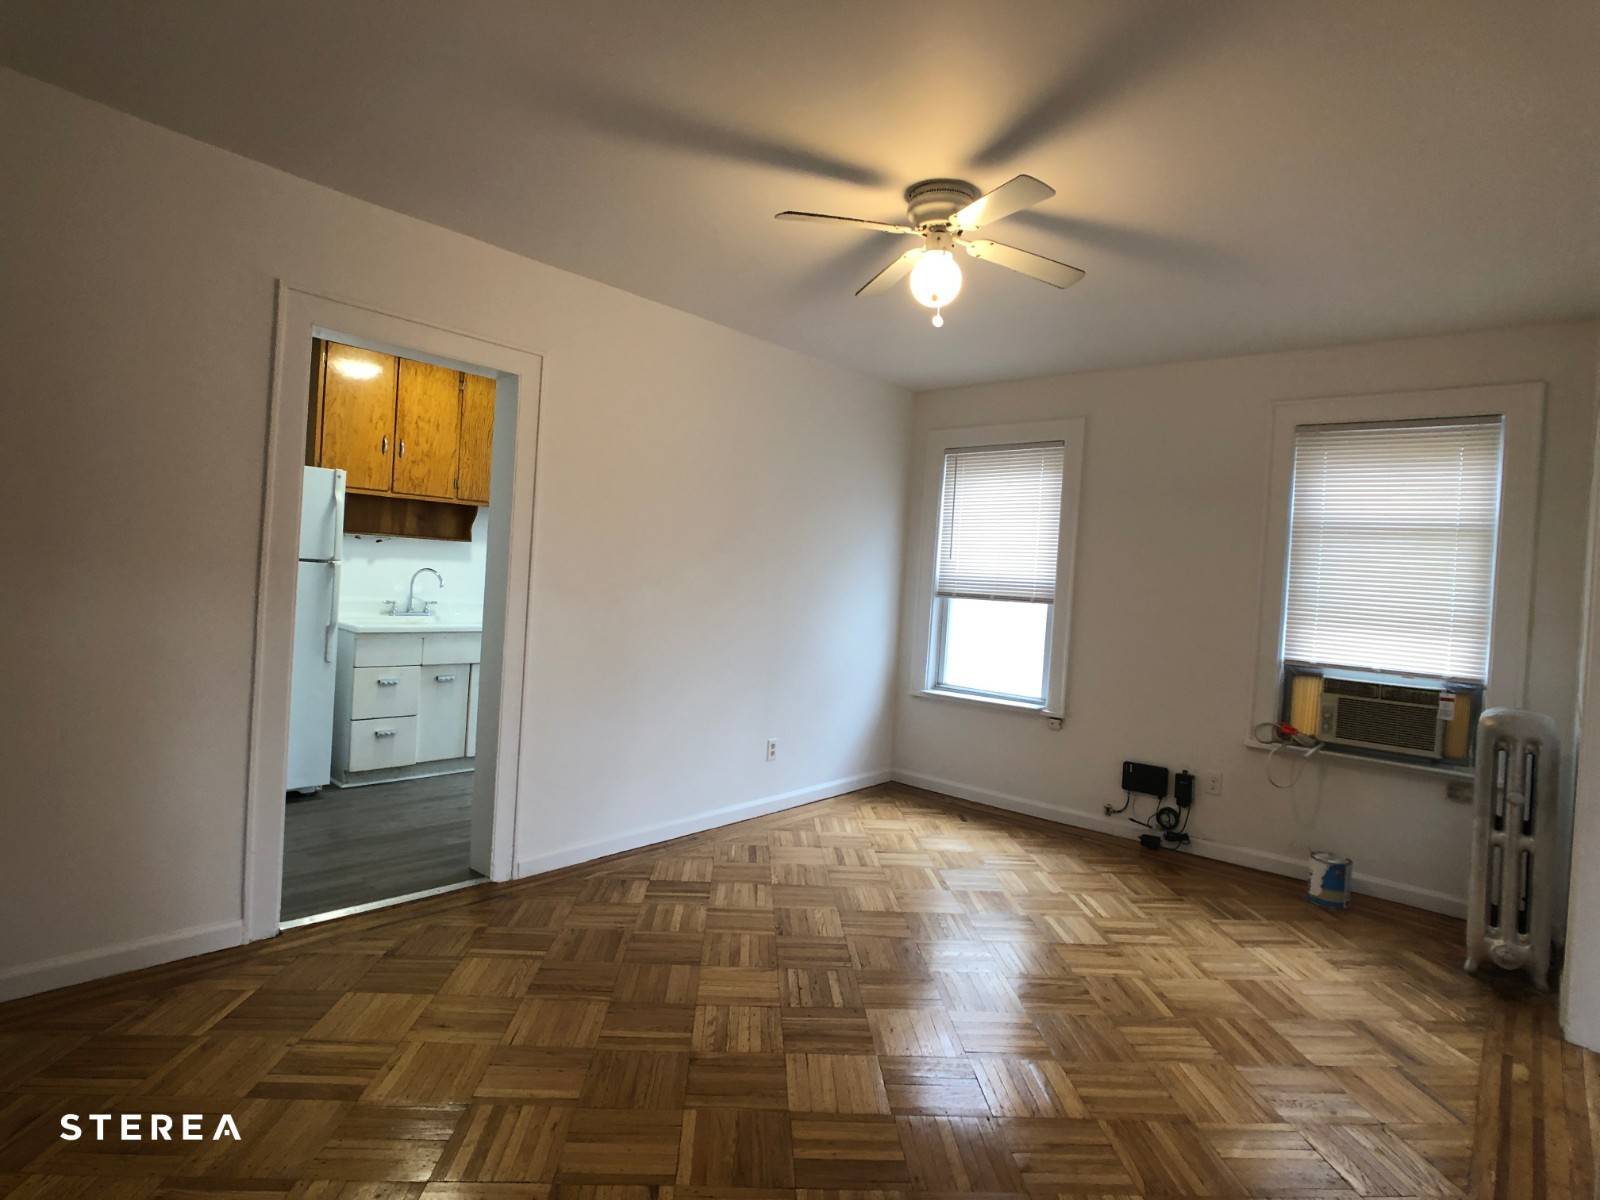 Rent this large, whole floor 3BR convertible to 4 1 bathroom apartment on Crescent Street just off of Ditmars Blvd.